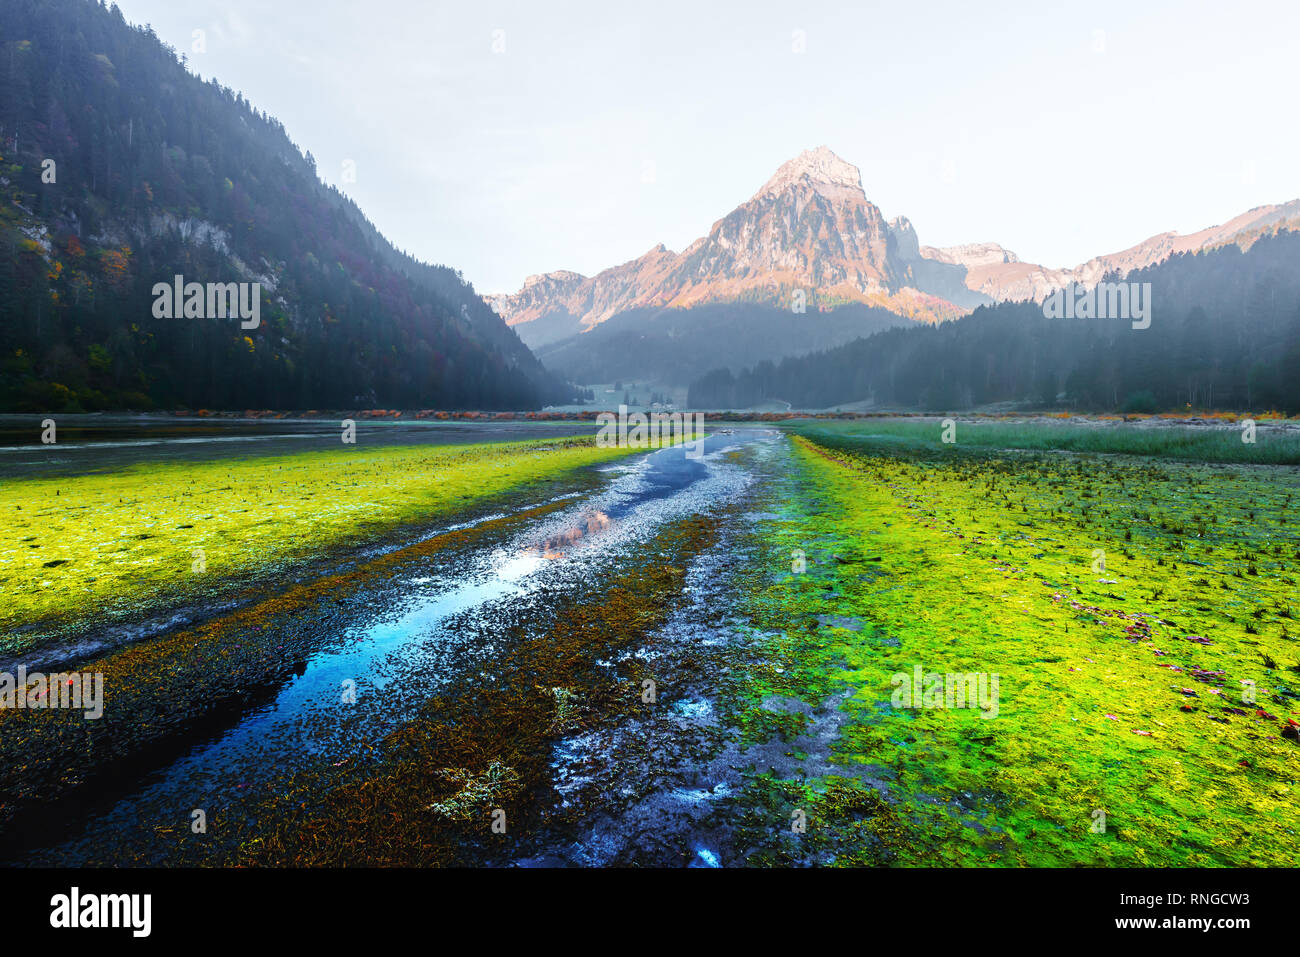 Picturesque spring view on Obersee lake in Swiss Alps. Nafels village, Switzerland. Landscape photography Stock Photo